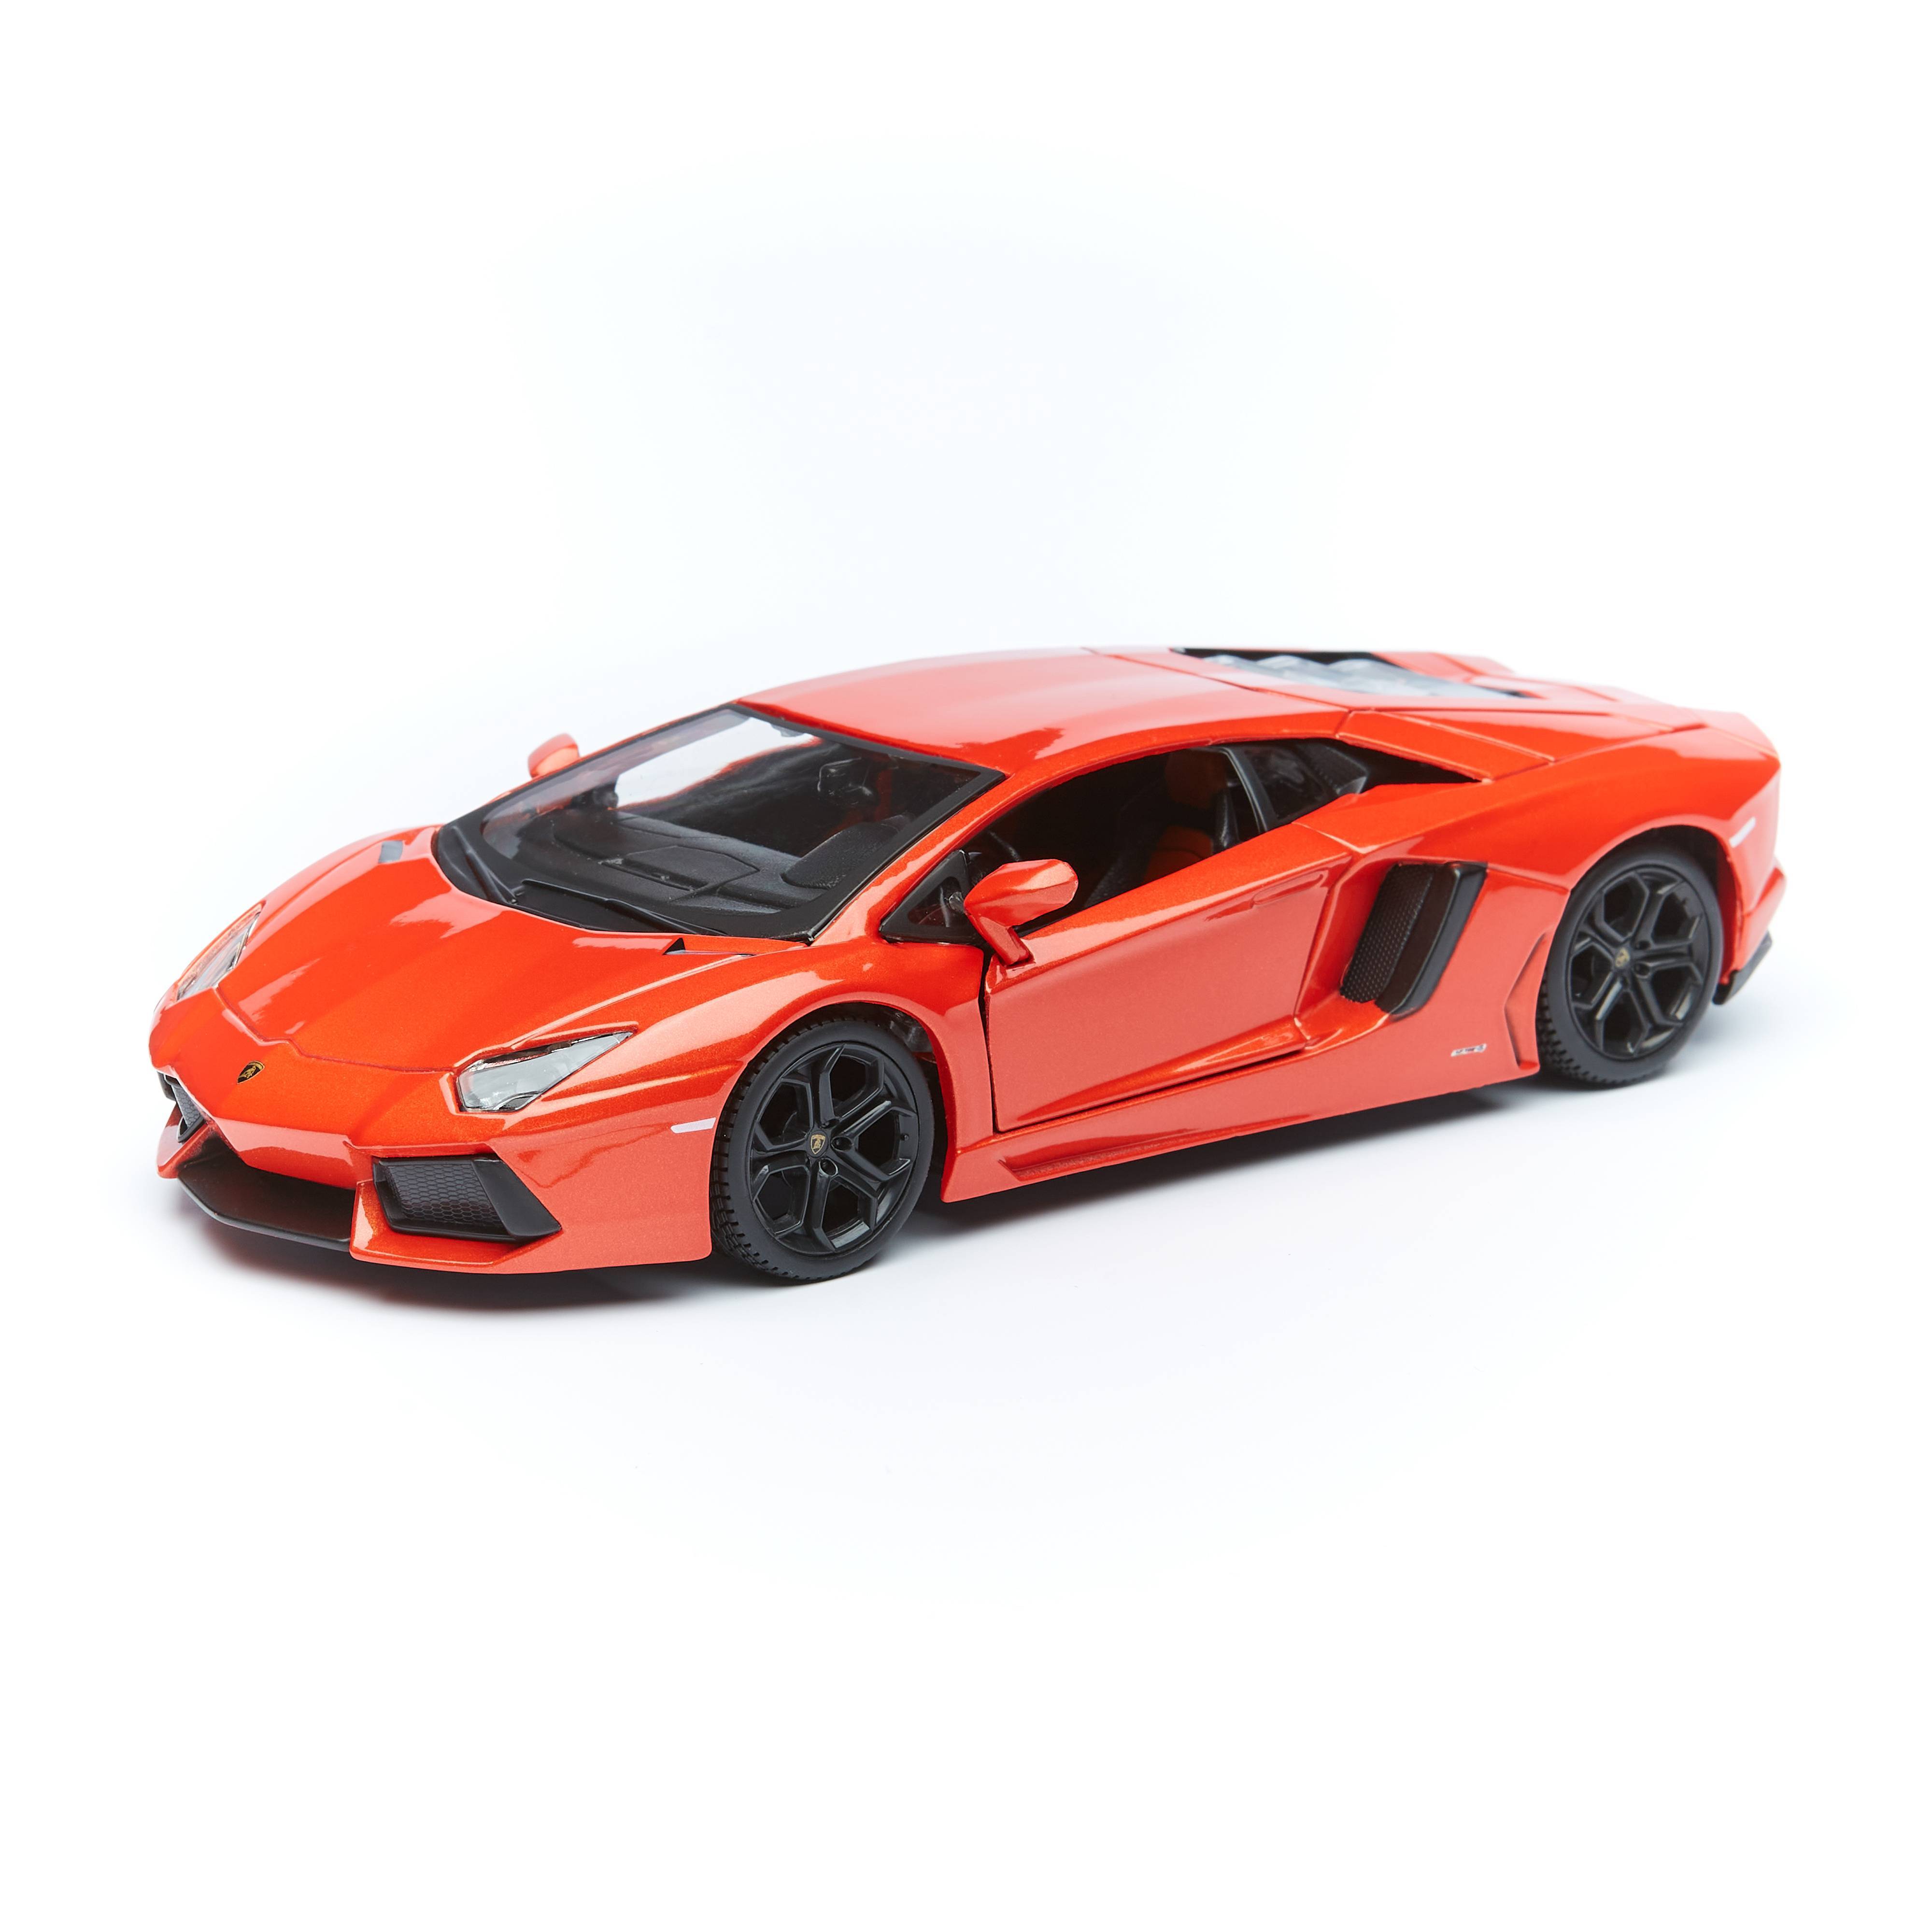 Машинка Maisto 31210, 1:24 SP (A) Lamborghini Aventador LP 700-4 maisto 1 18 harley davidson 2018 forty eight special alloy static die casting motorcycle model classic car collectible gift toy